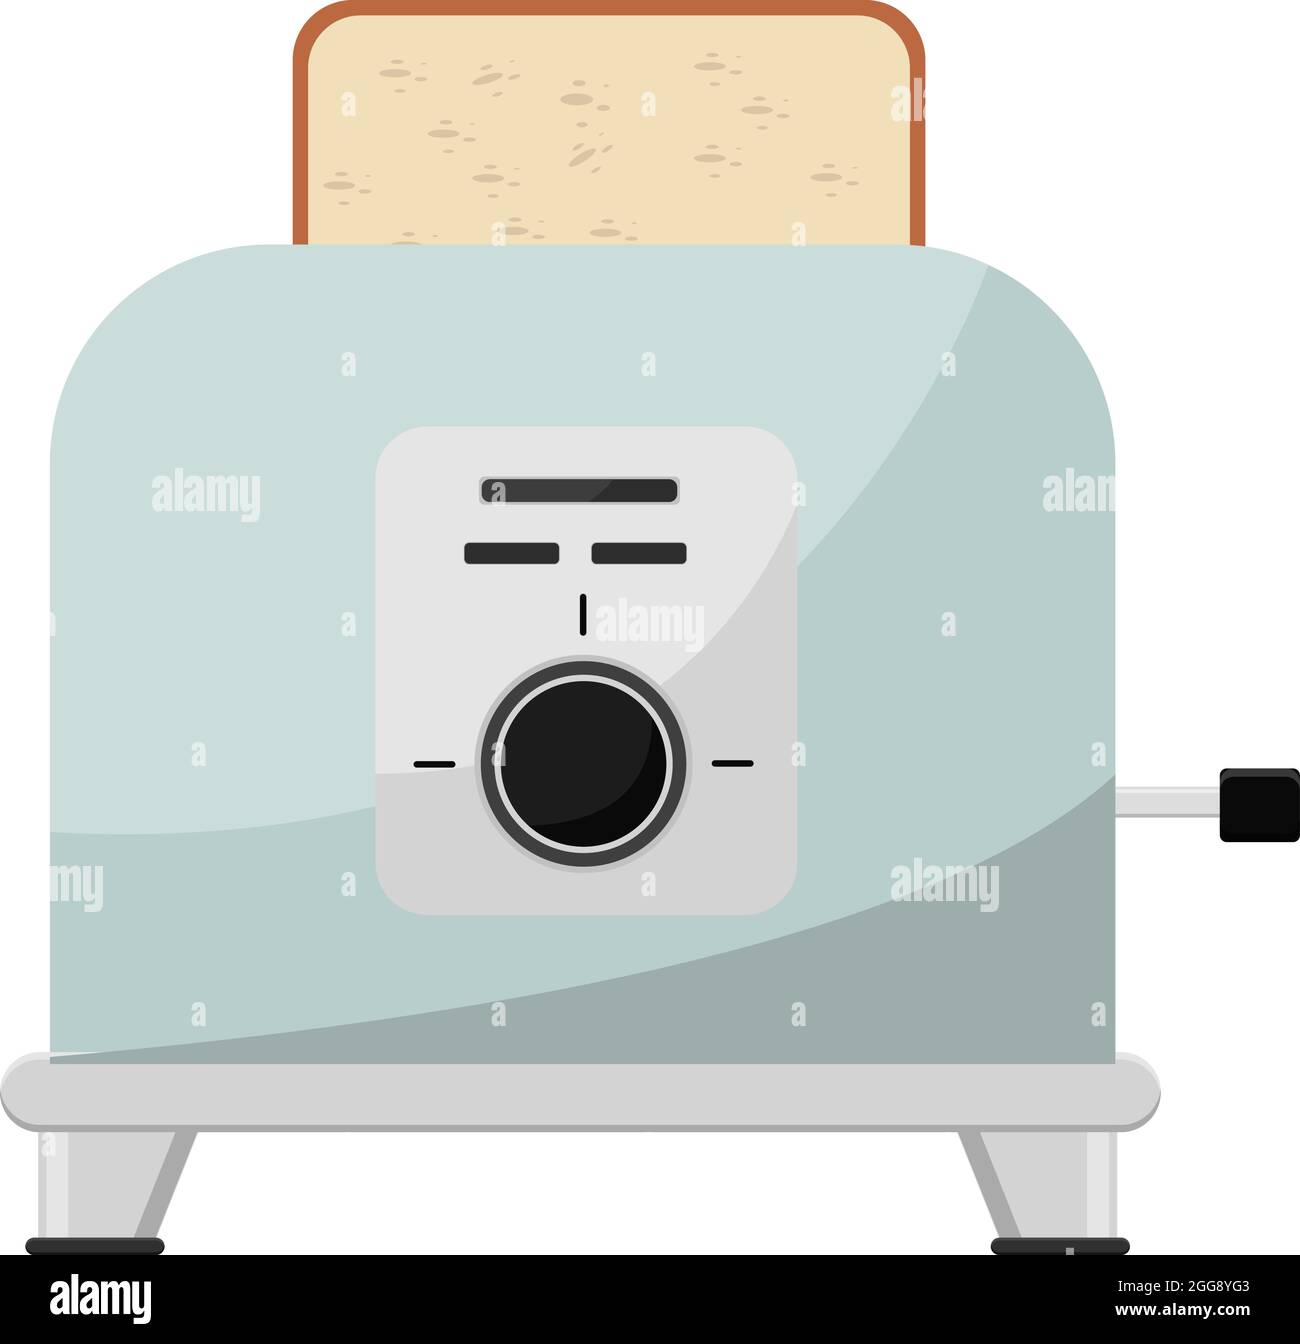 Electric toaster, illustration, vector on white background. Stock Vector